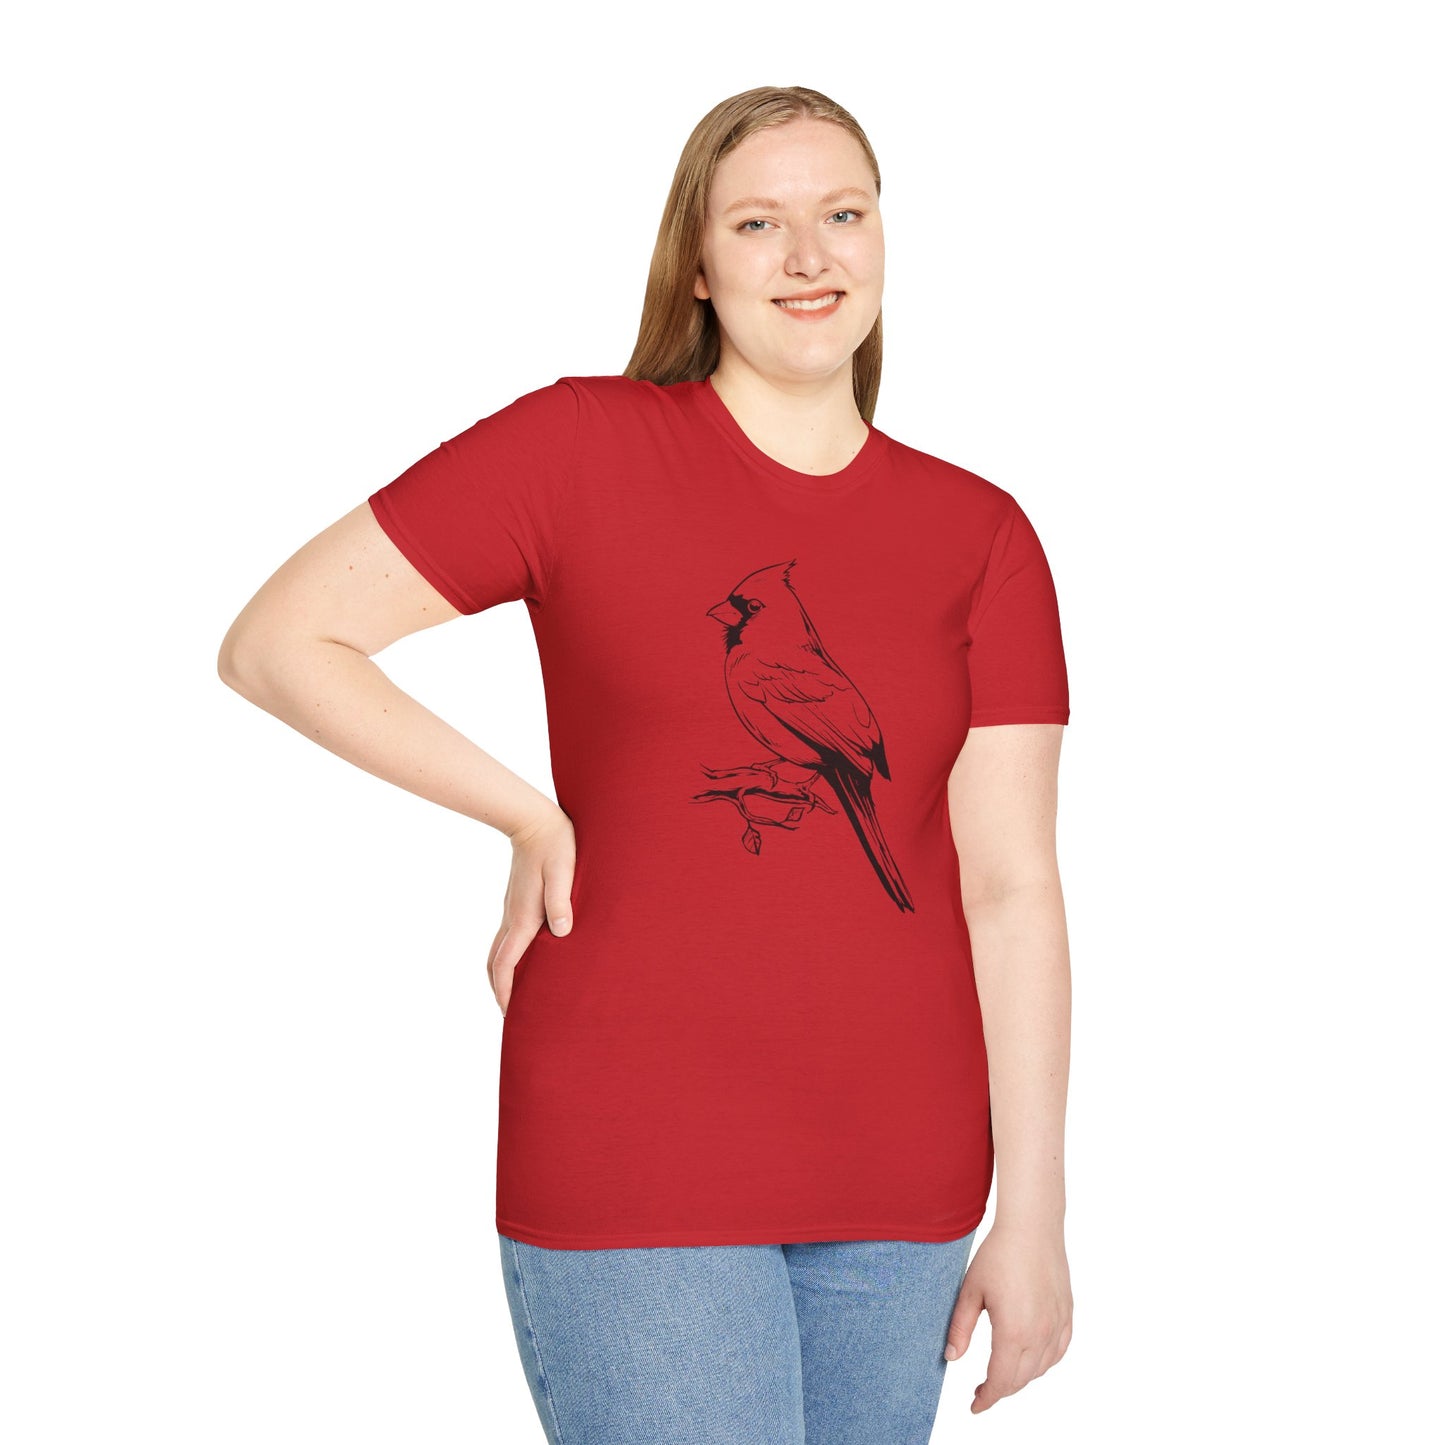 Vibrant Cardinal T-Shirt: A Stylish Statement for Every Occasion